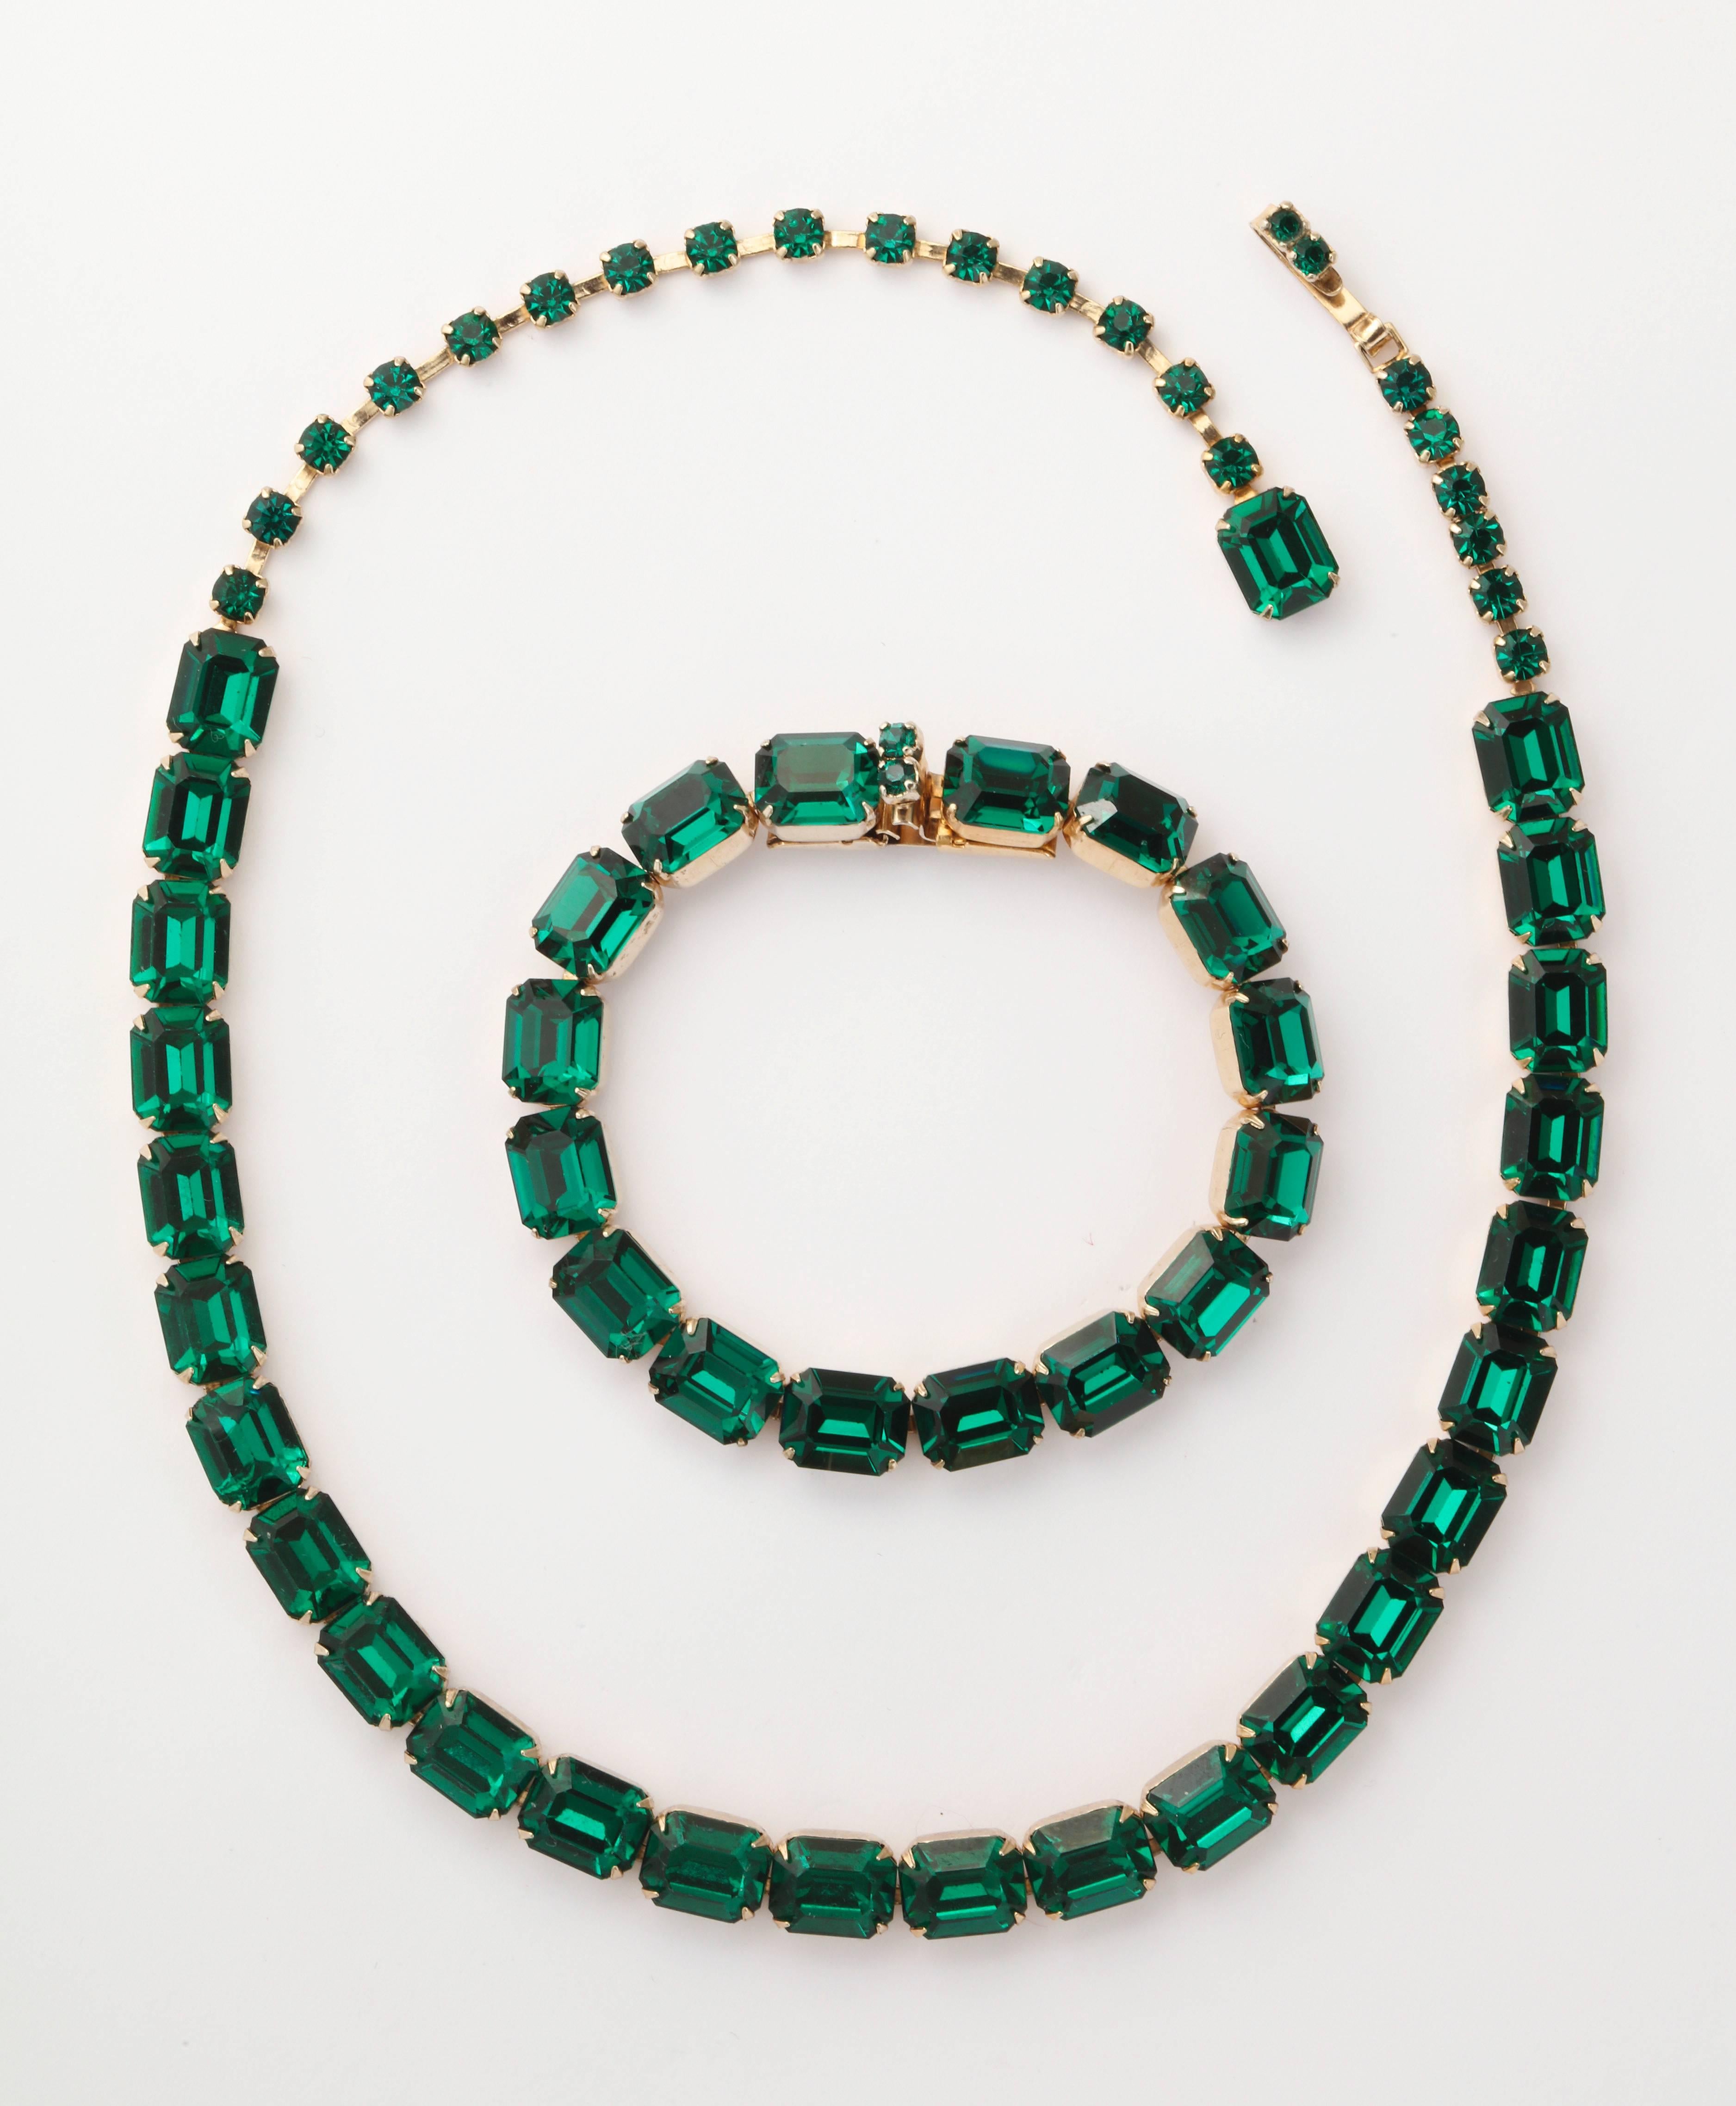 Stunning emerald cut, green Austrian crystal, are artfully set in gold over silver, and radiate with exactly the luscious color of fine quality emeralds. This is a demi parure of rare quality by the Weiss Albert Weiss Company that operated on 5th